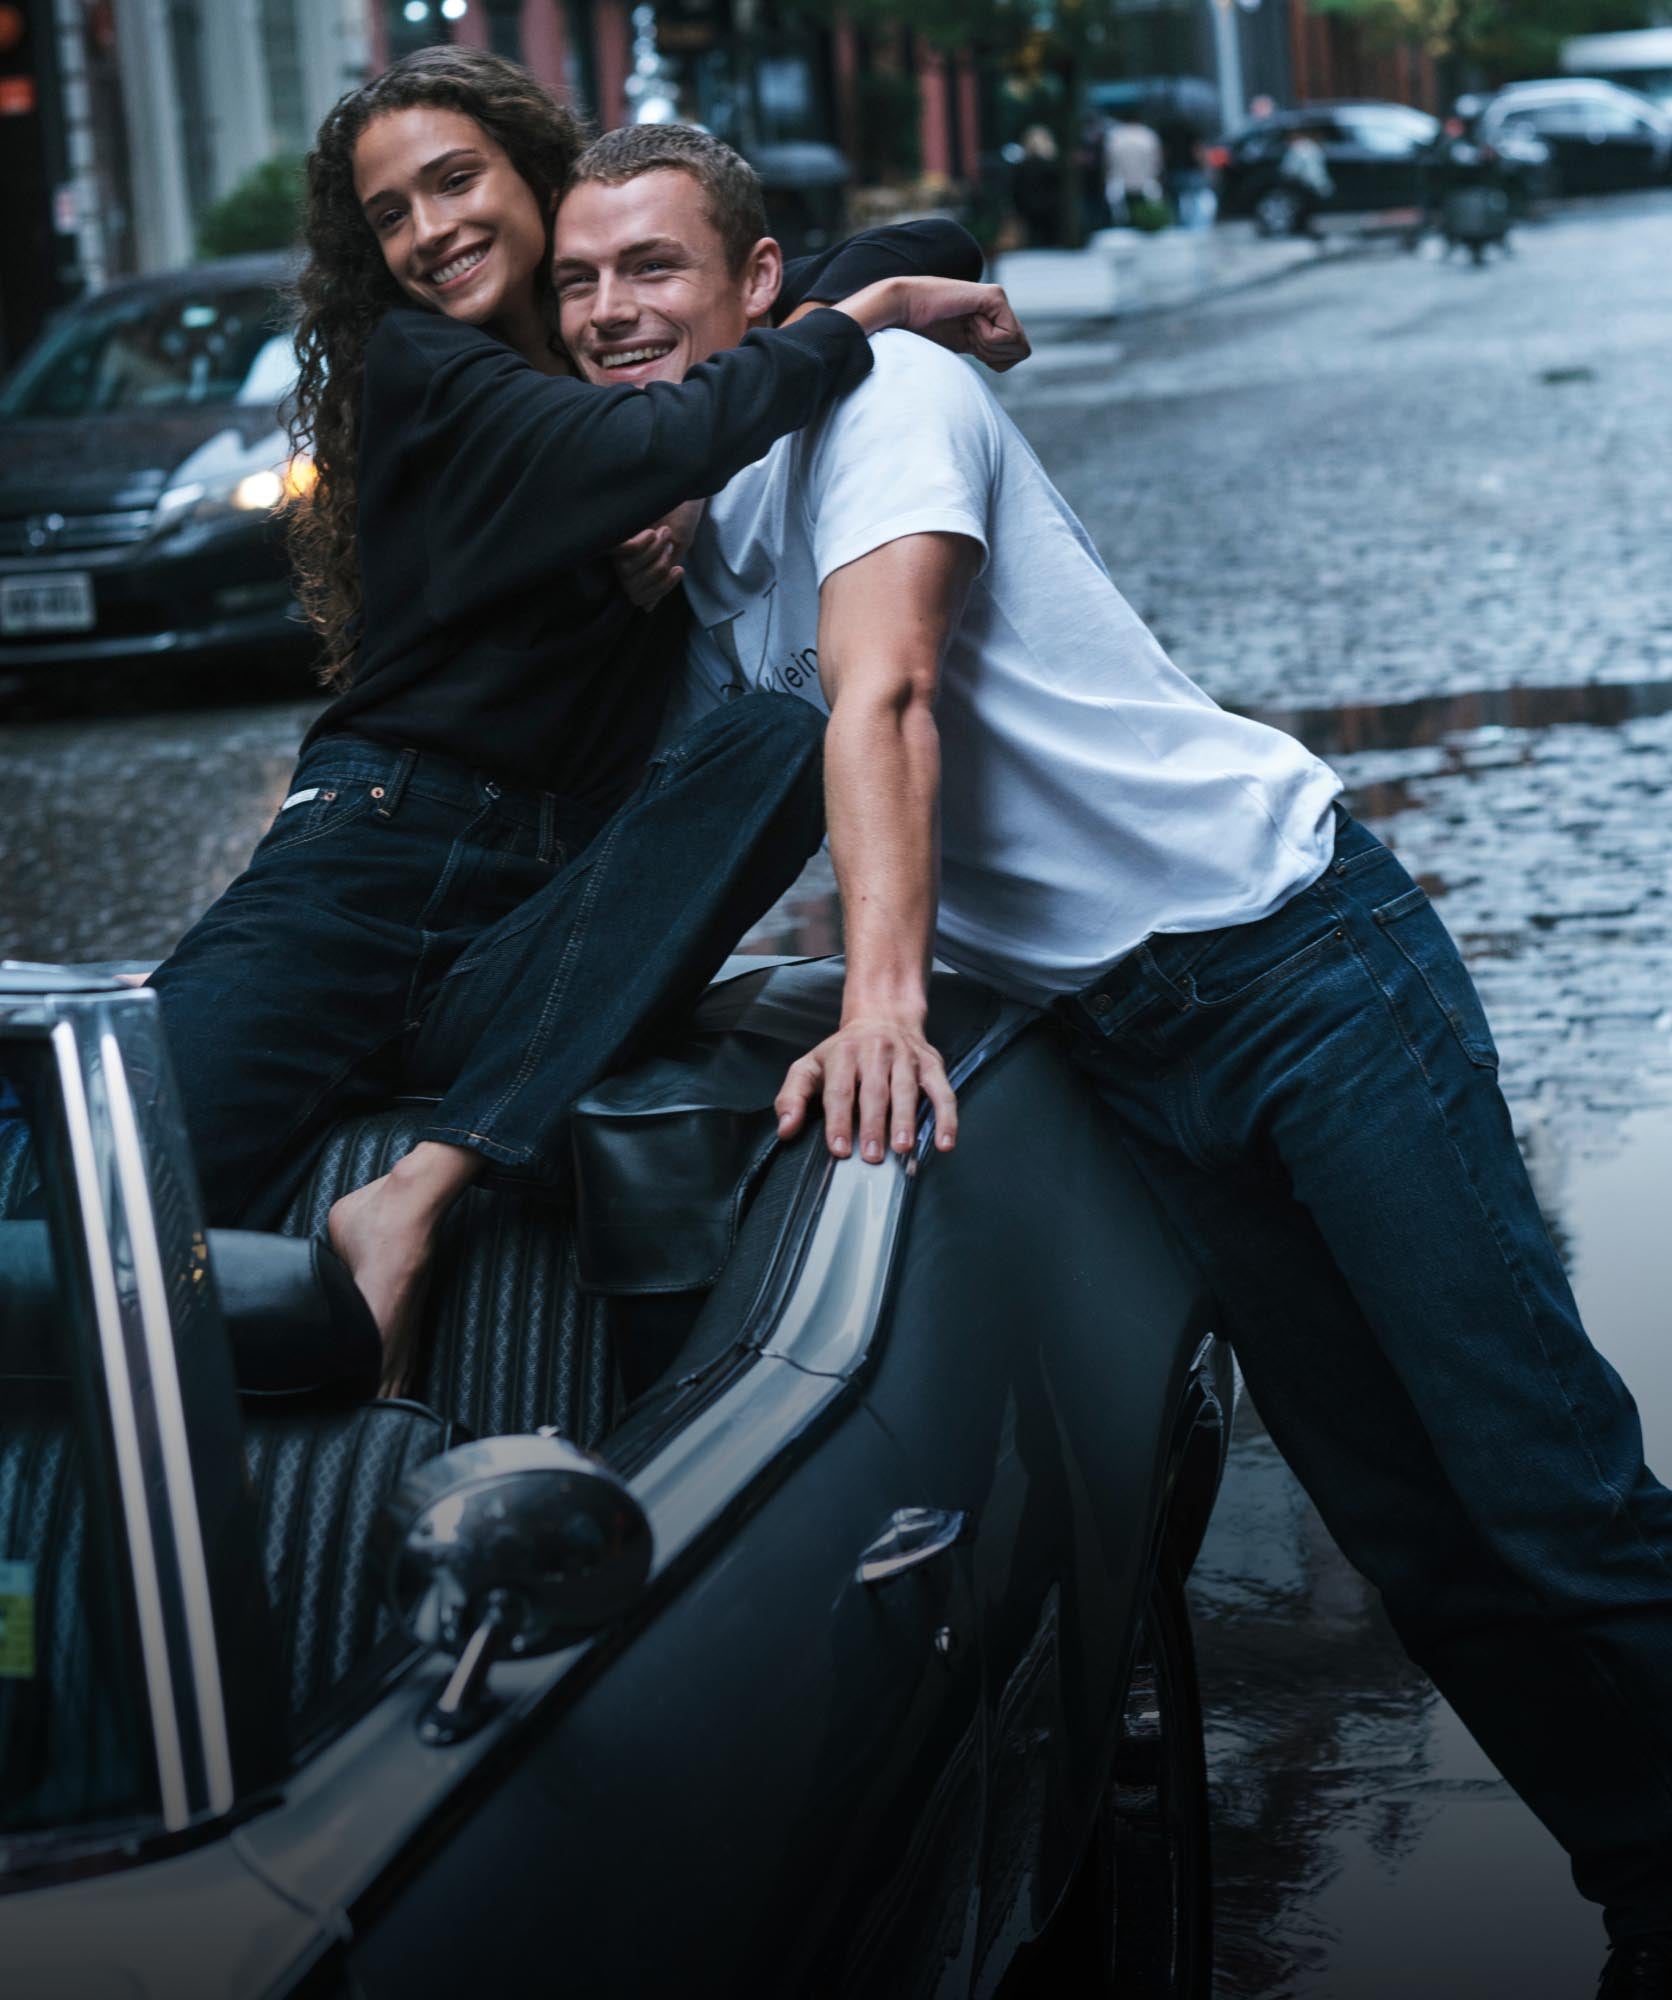 Woman wearing a matching sweat set sitting in a car wrapping her arms around a man wearing a t-shirt and jeans